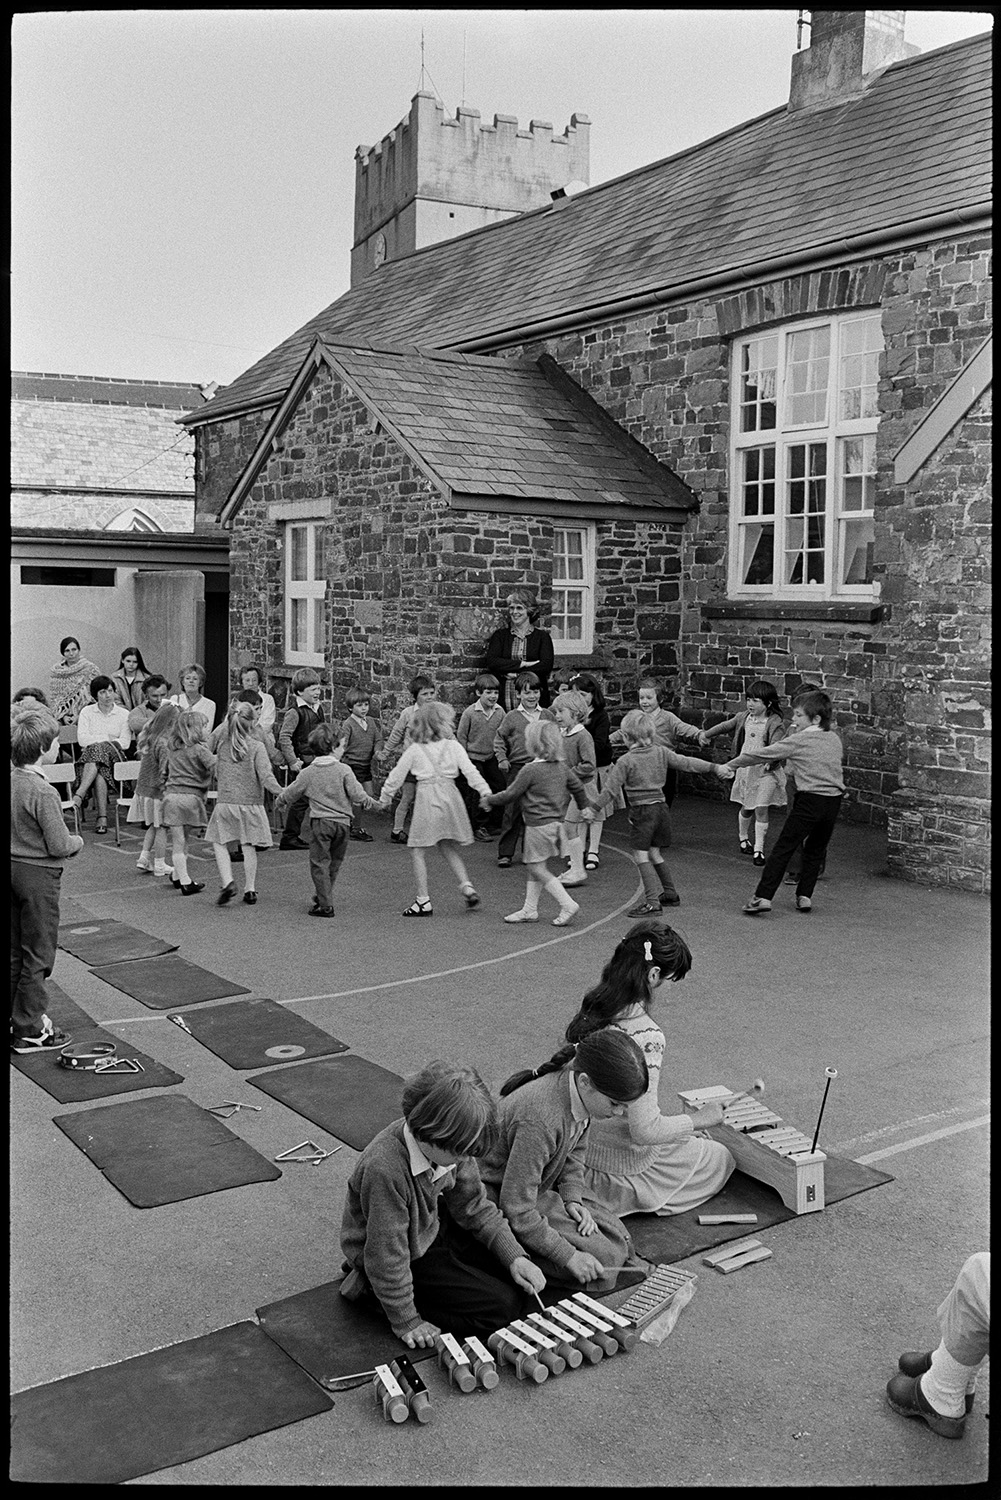 Schoolchildren dancing in school playground. 
[Schoolchildren playing xylophones and dancing in a circle in Dolton Primary School playground. The school building and church tower can be seen in the background.]